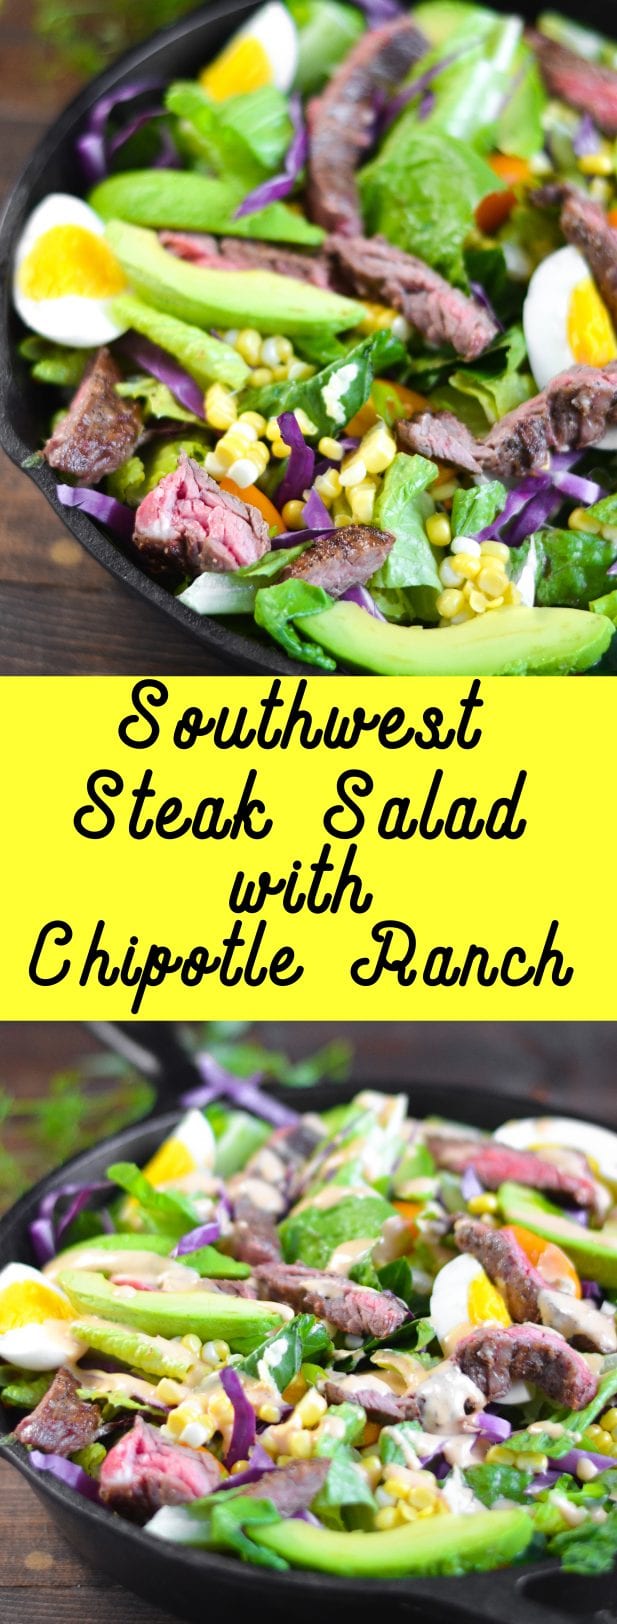 Southwest Steak Salad with Chipotle Ranch